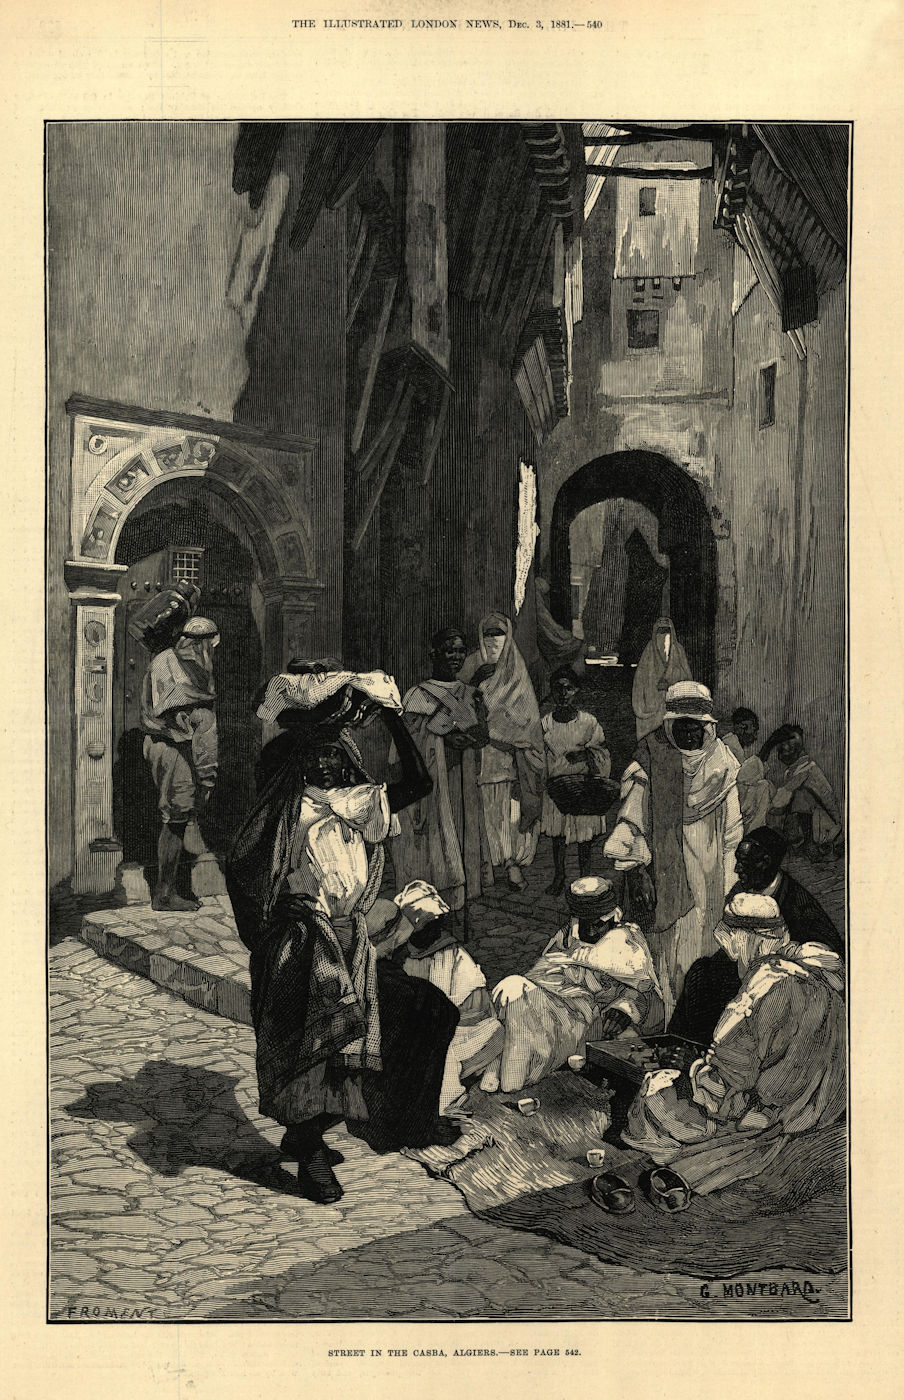 Associate Product Street in the Kasbah, Algiers. Algeria 1881 antique ILN full page print